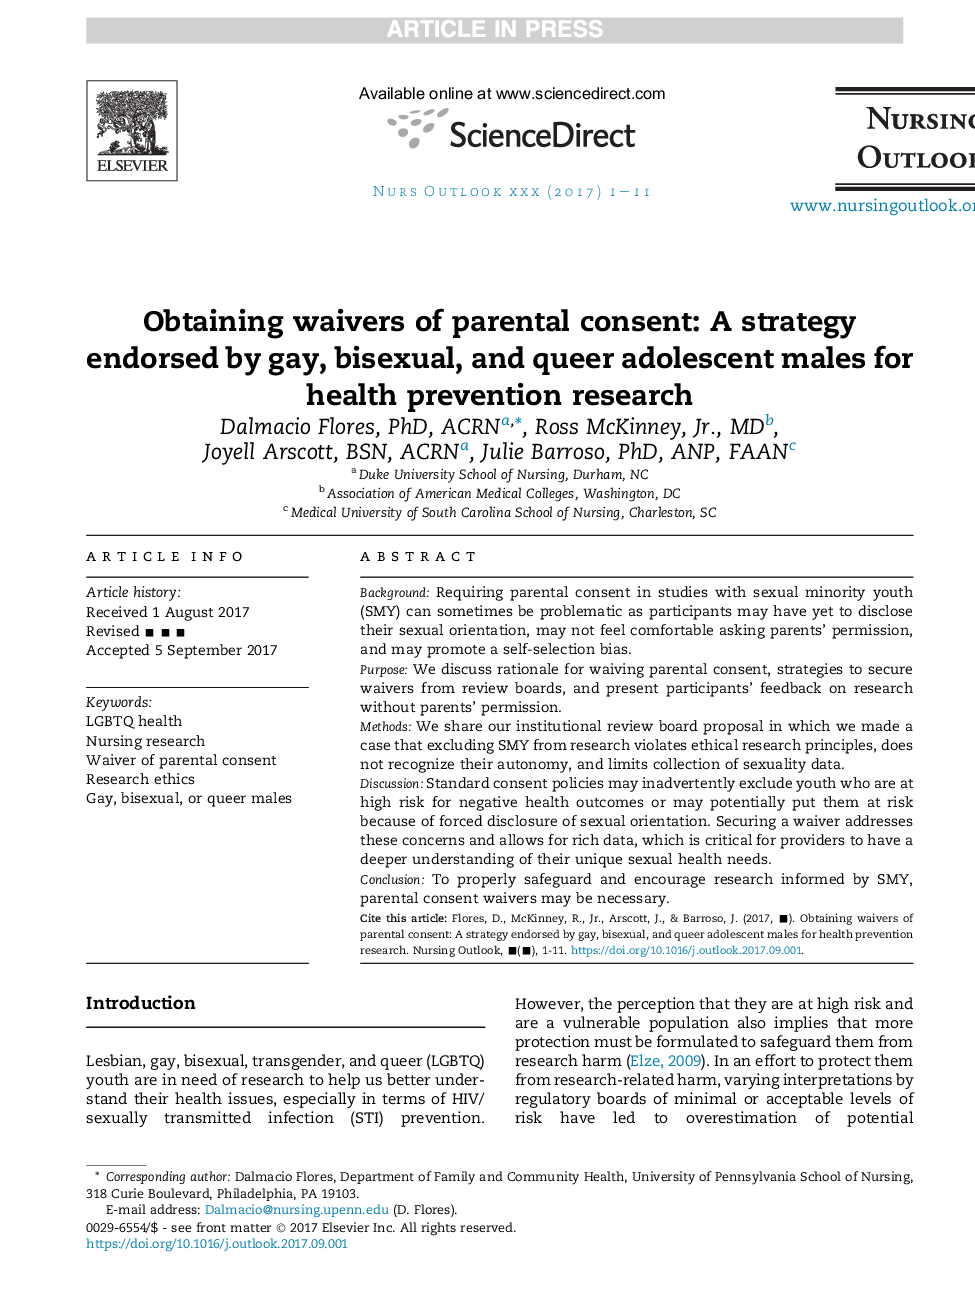 Obtaining waivers of parental consent: A strategy endorsed by gay, bisexual, and queer adolescent males for health prevention research